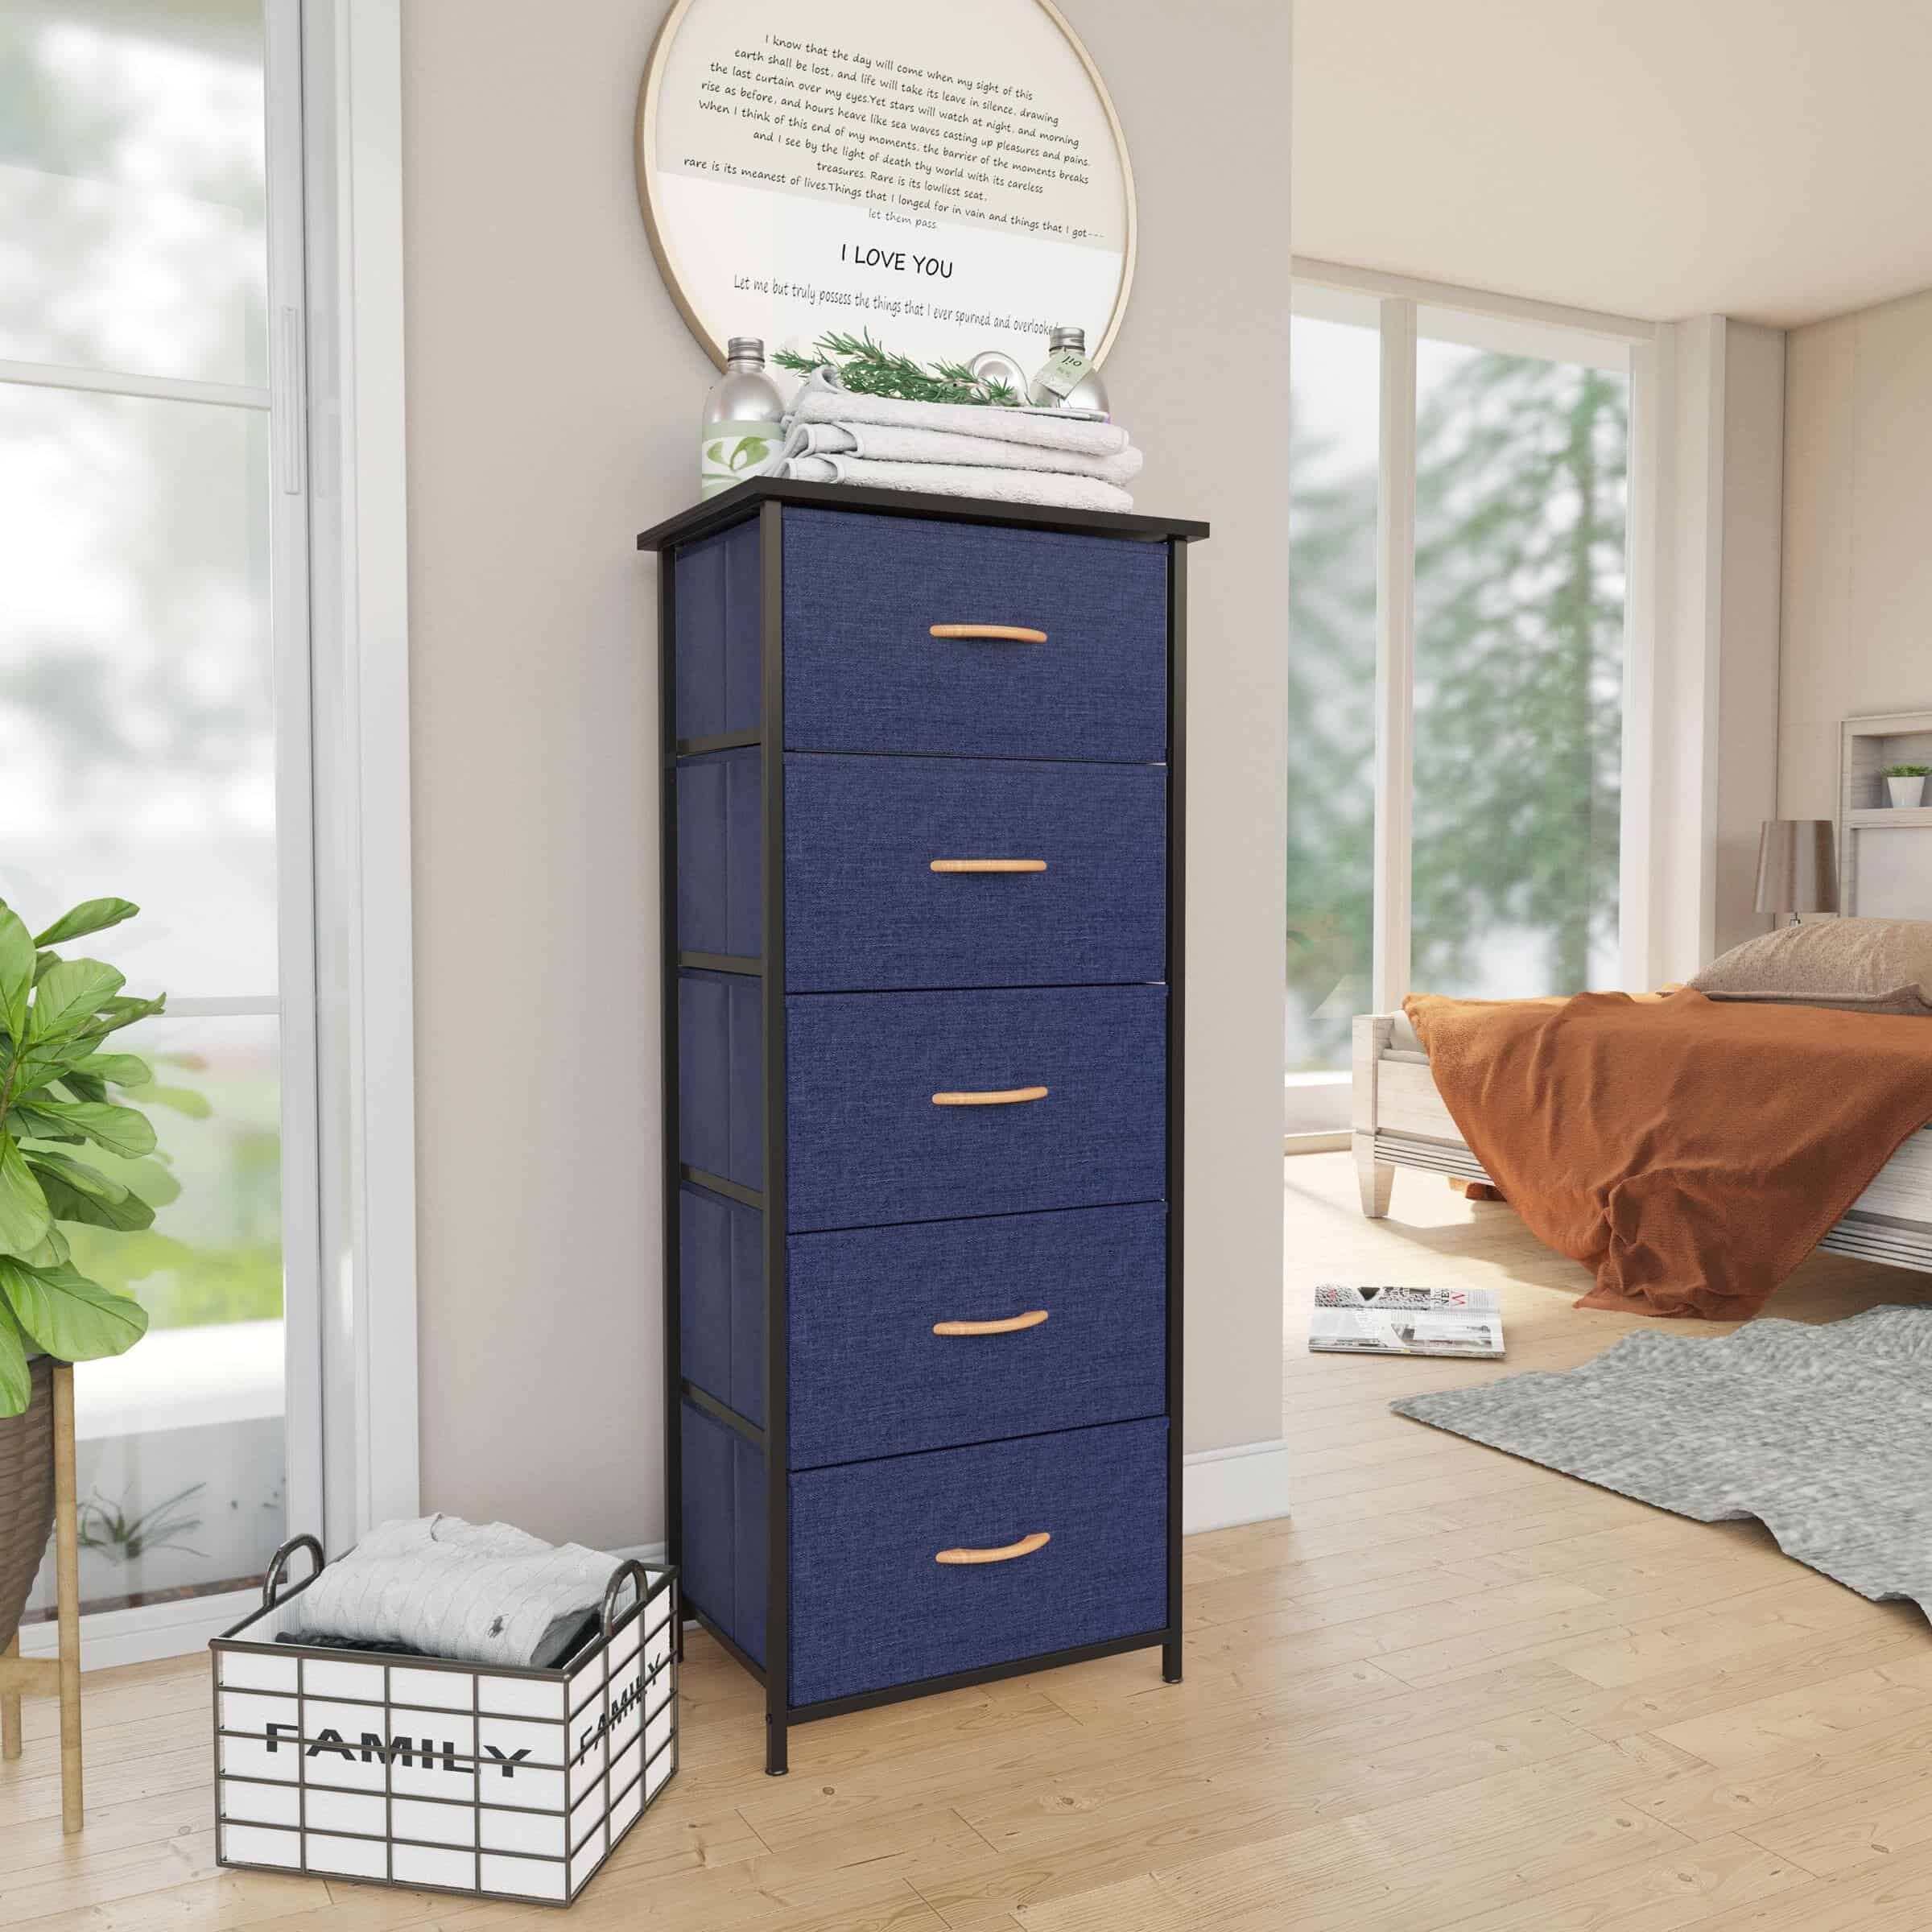 A Dresser With Foldable Drawers Is Stylish Yet Budget Friendly